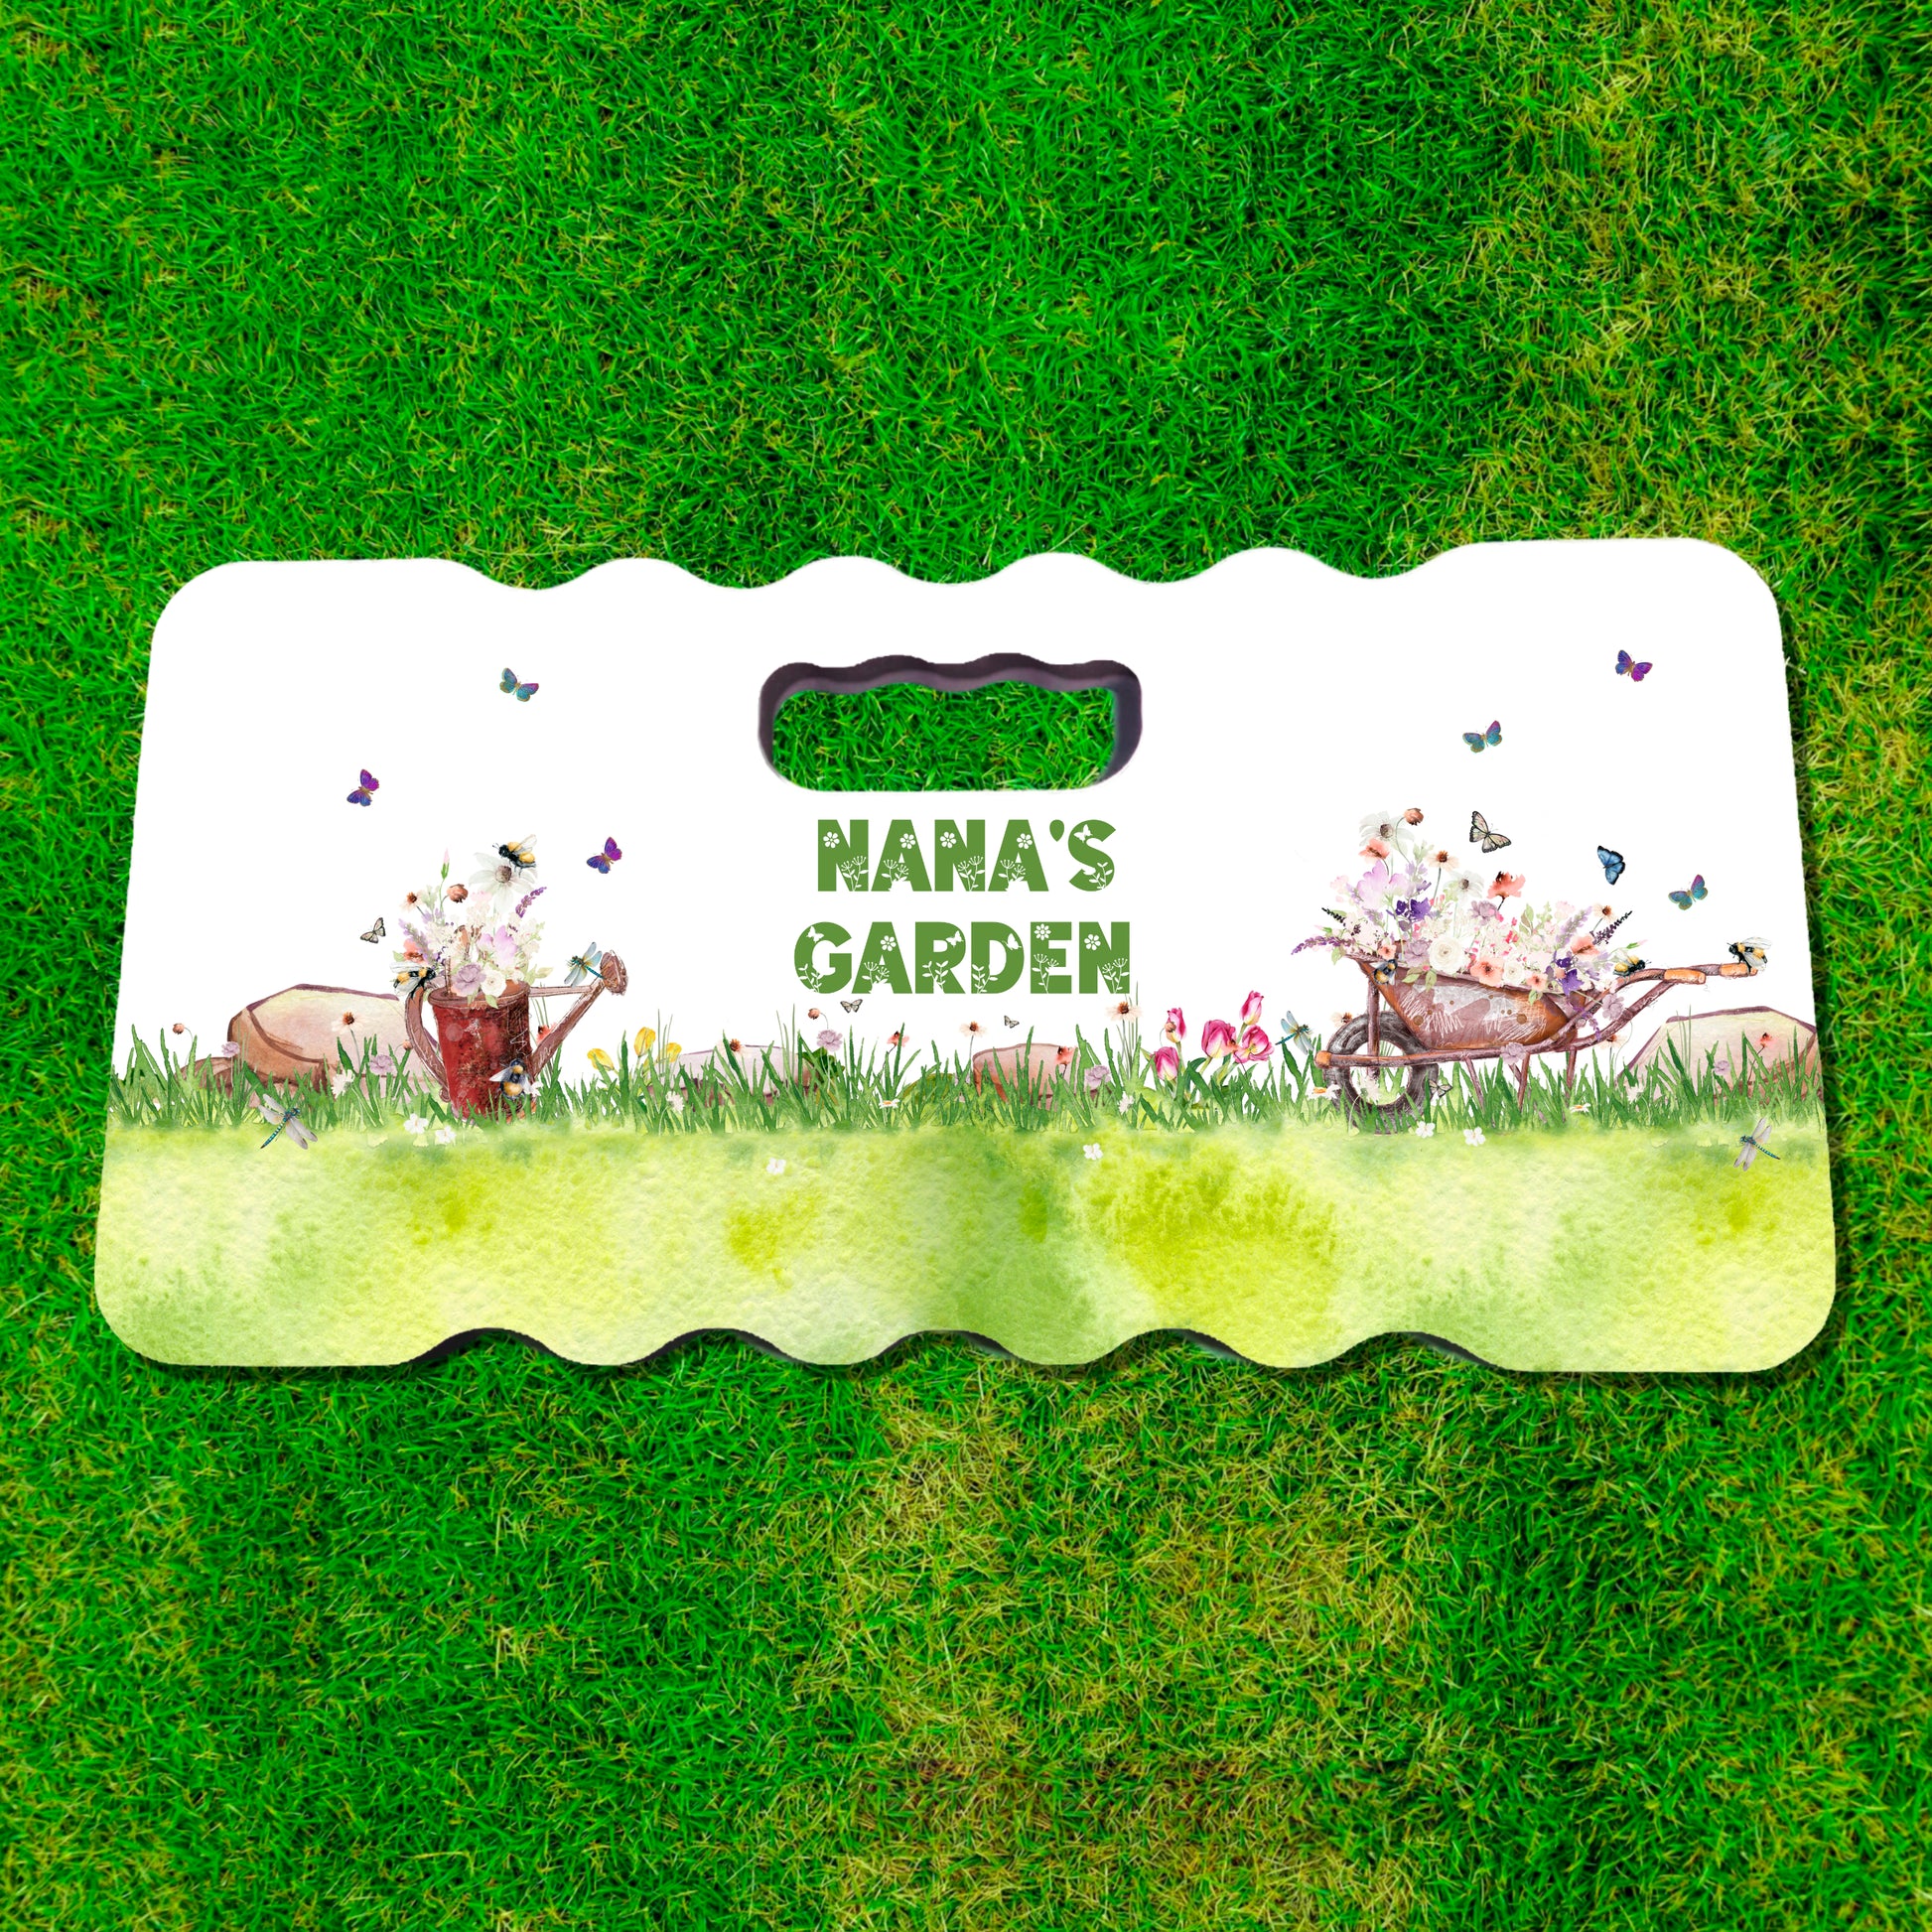 Foam kneeling pad with floral watering can and wheelbarrow nana's garden